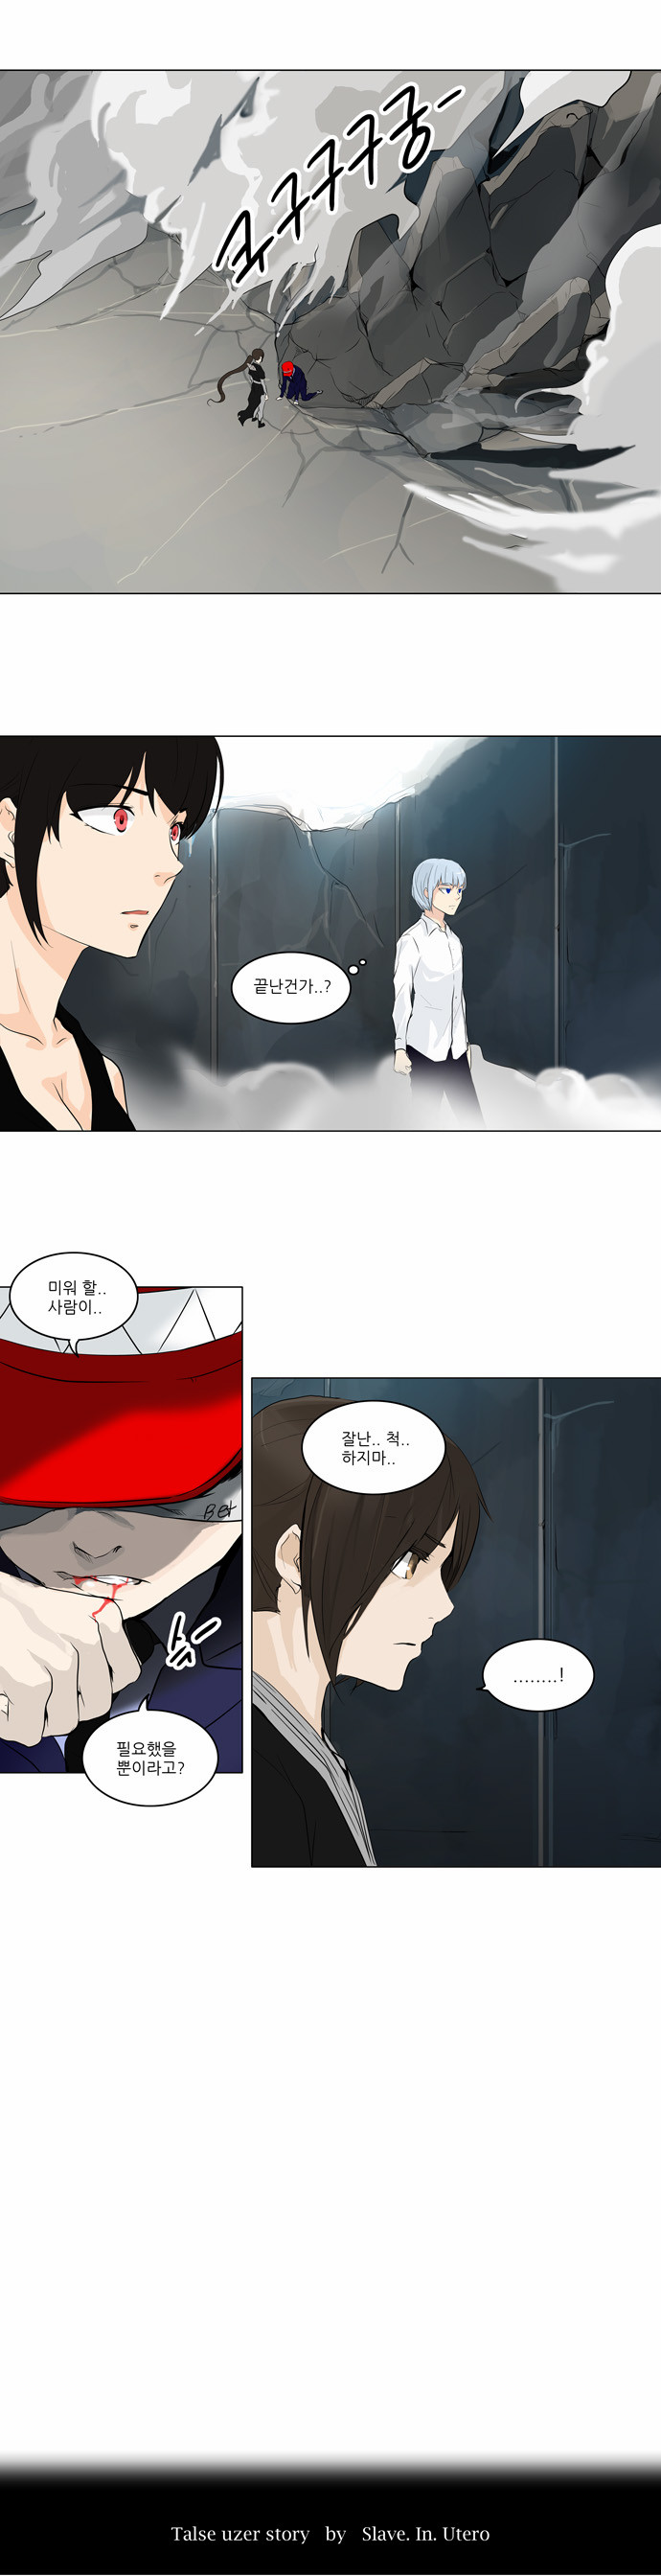 Tower of God - Chapter 178 - Page 1